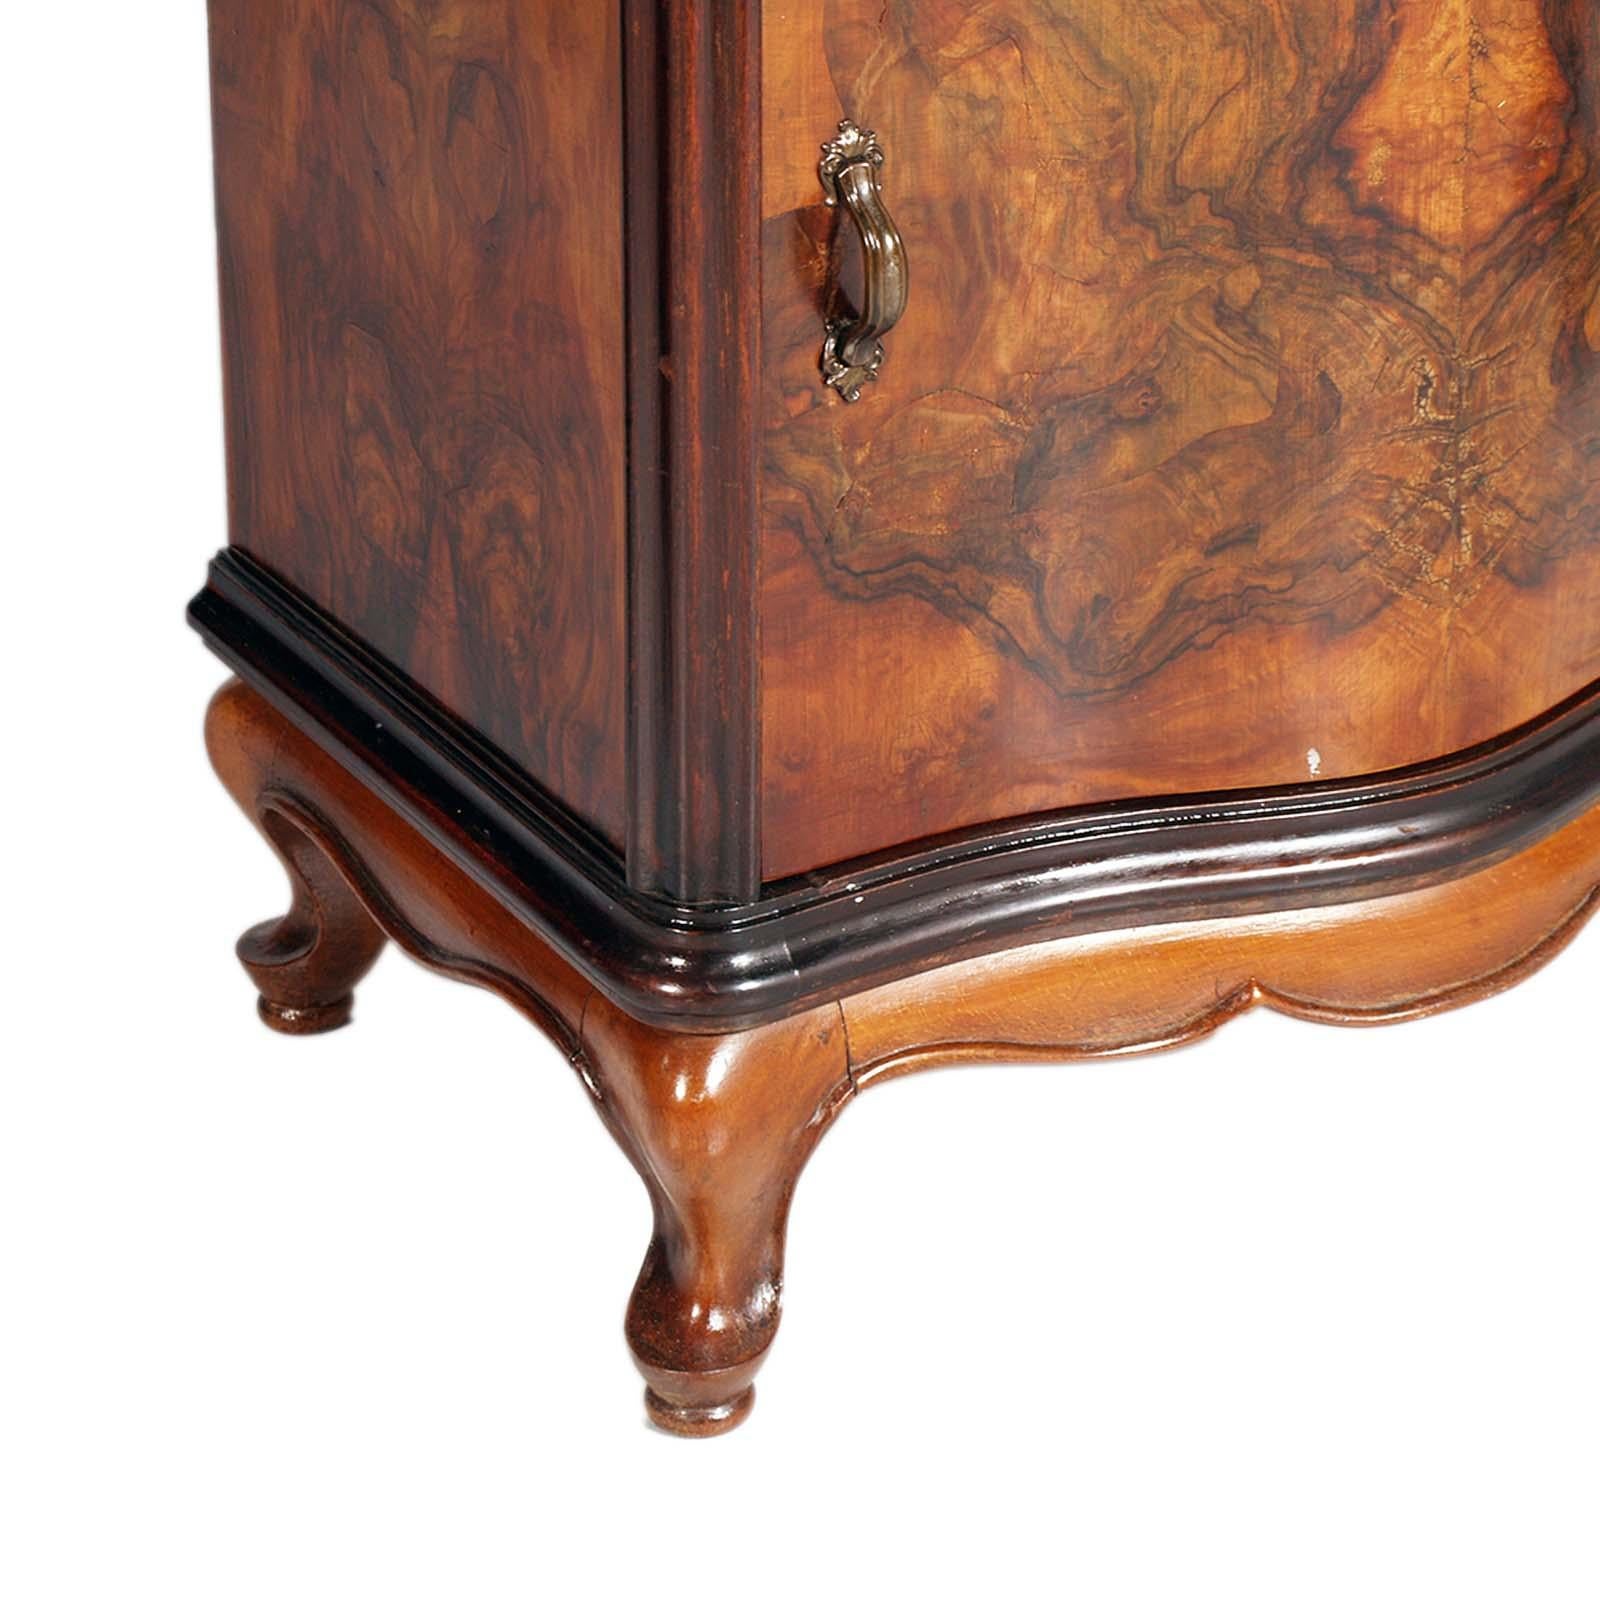 Venice Baroque Naightstands Bella Epoque, Walnut and Briar, by Testolini Freres For Sale 1